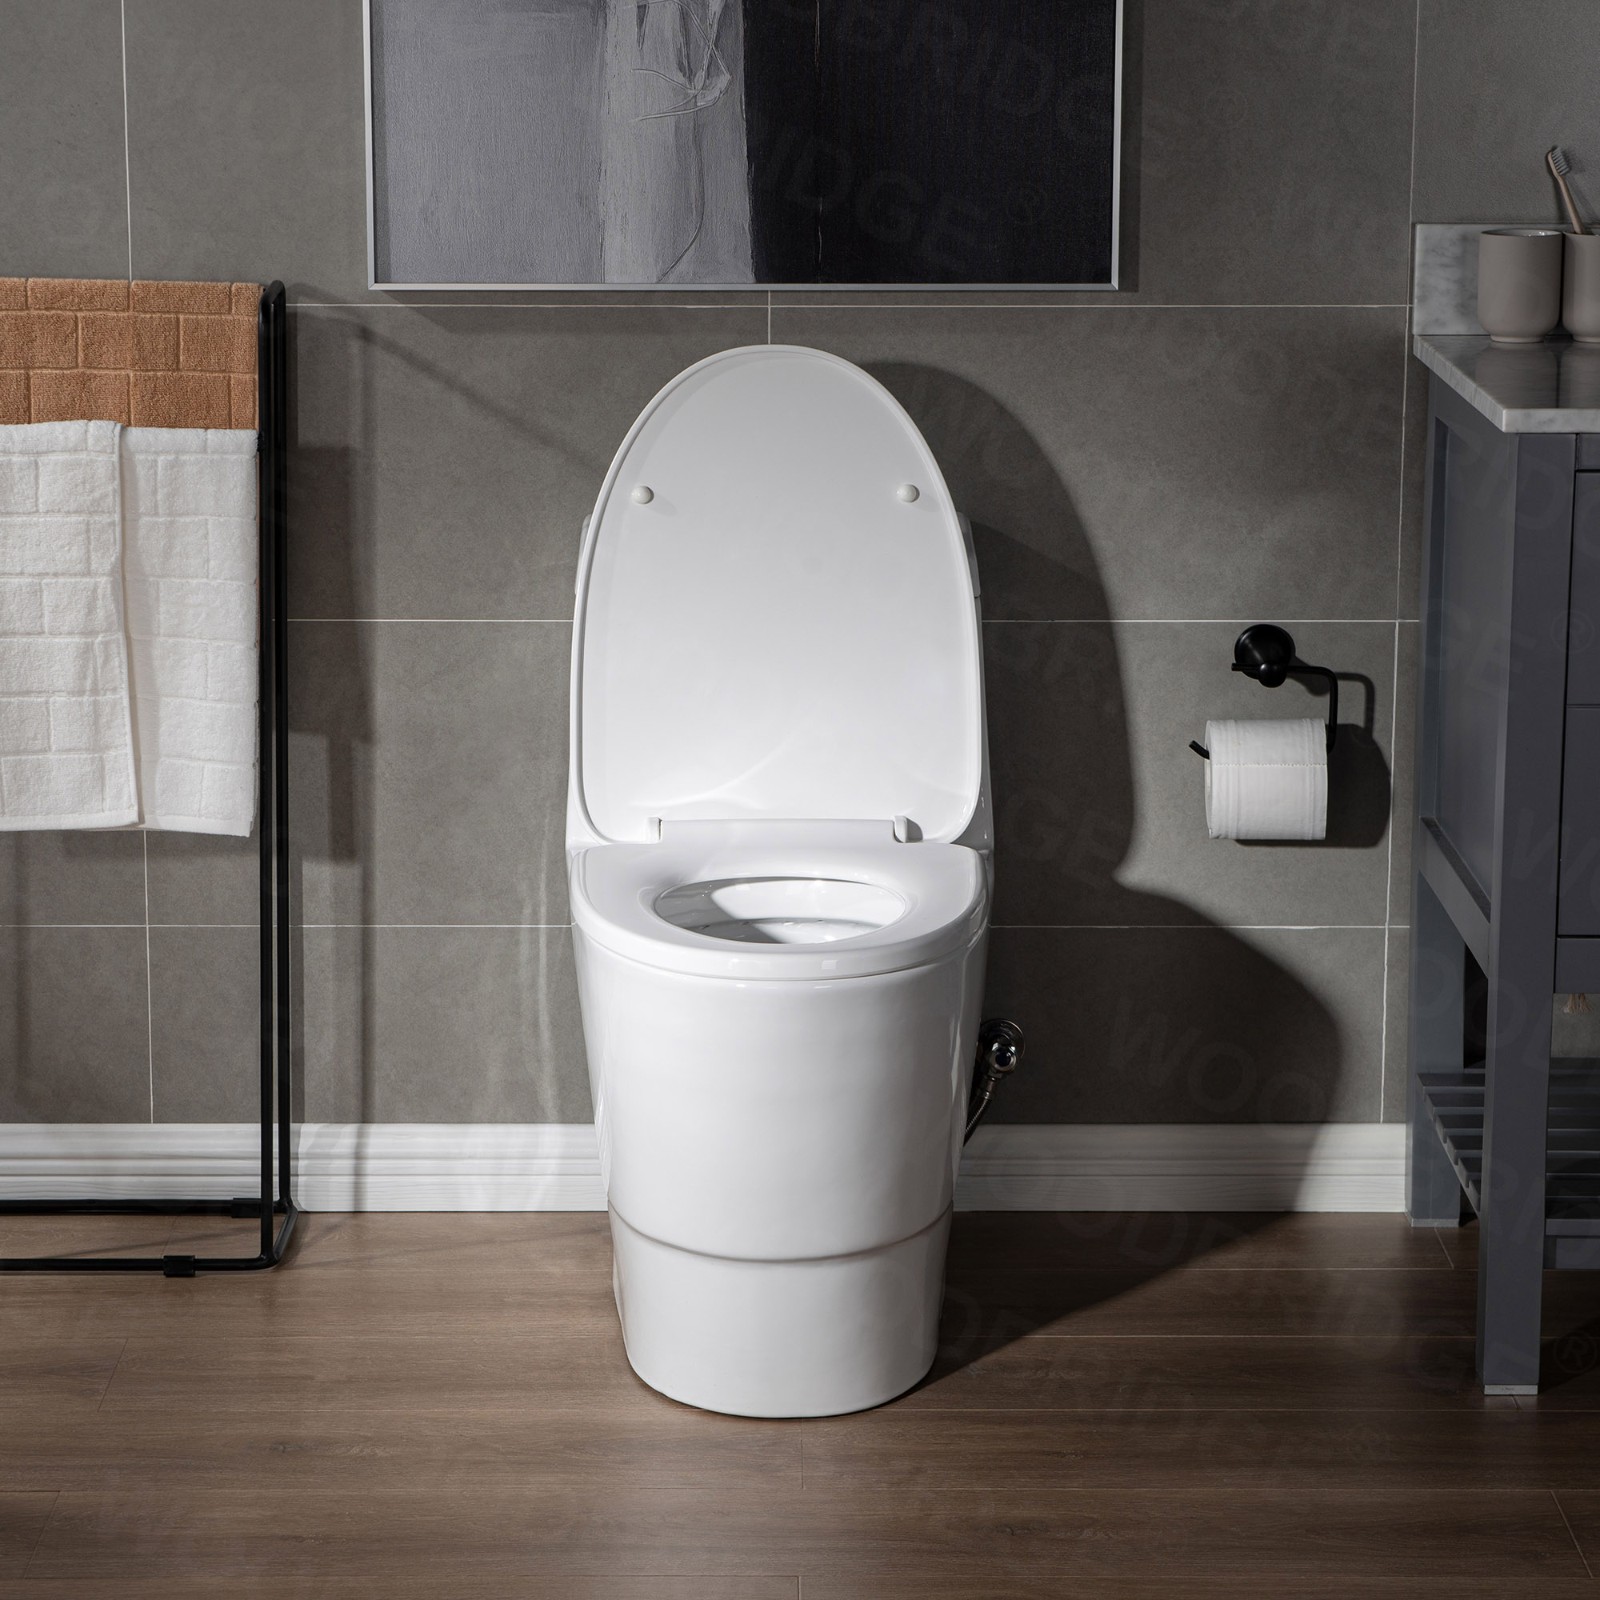  WOODBRIDGEE One Piece Toilet with Soft Closing Seat, Chair Height, 1.28 GPF Dual, Water Sensed, 1000 Gram MaP Flushing Score Toilet with Brushed Nickel Button T0001-BN, White_5732